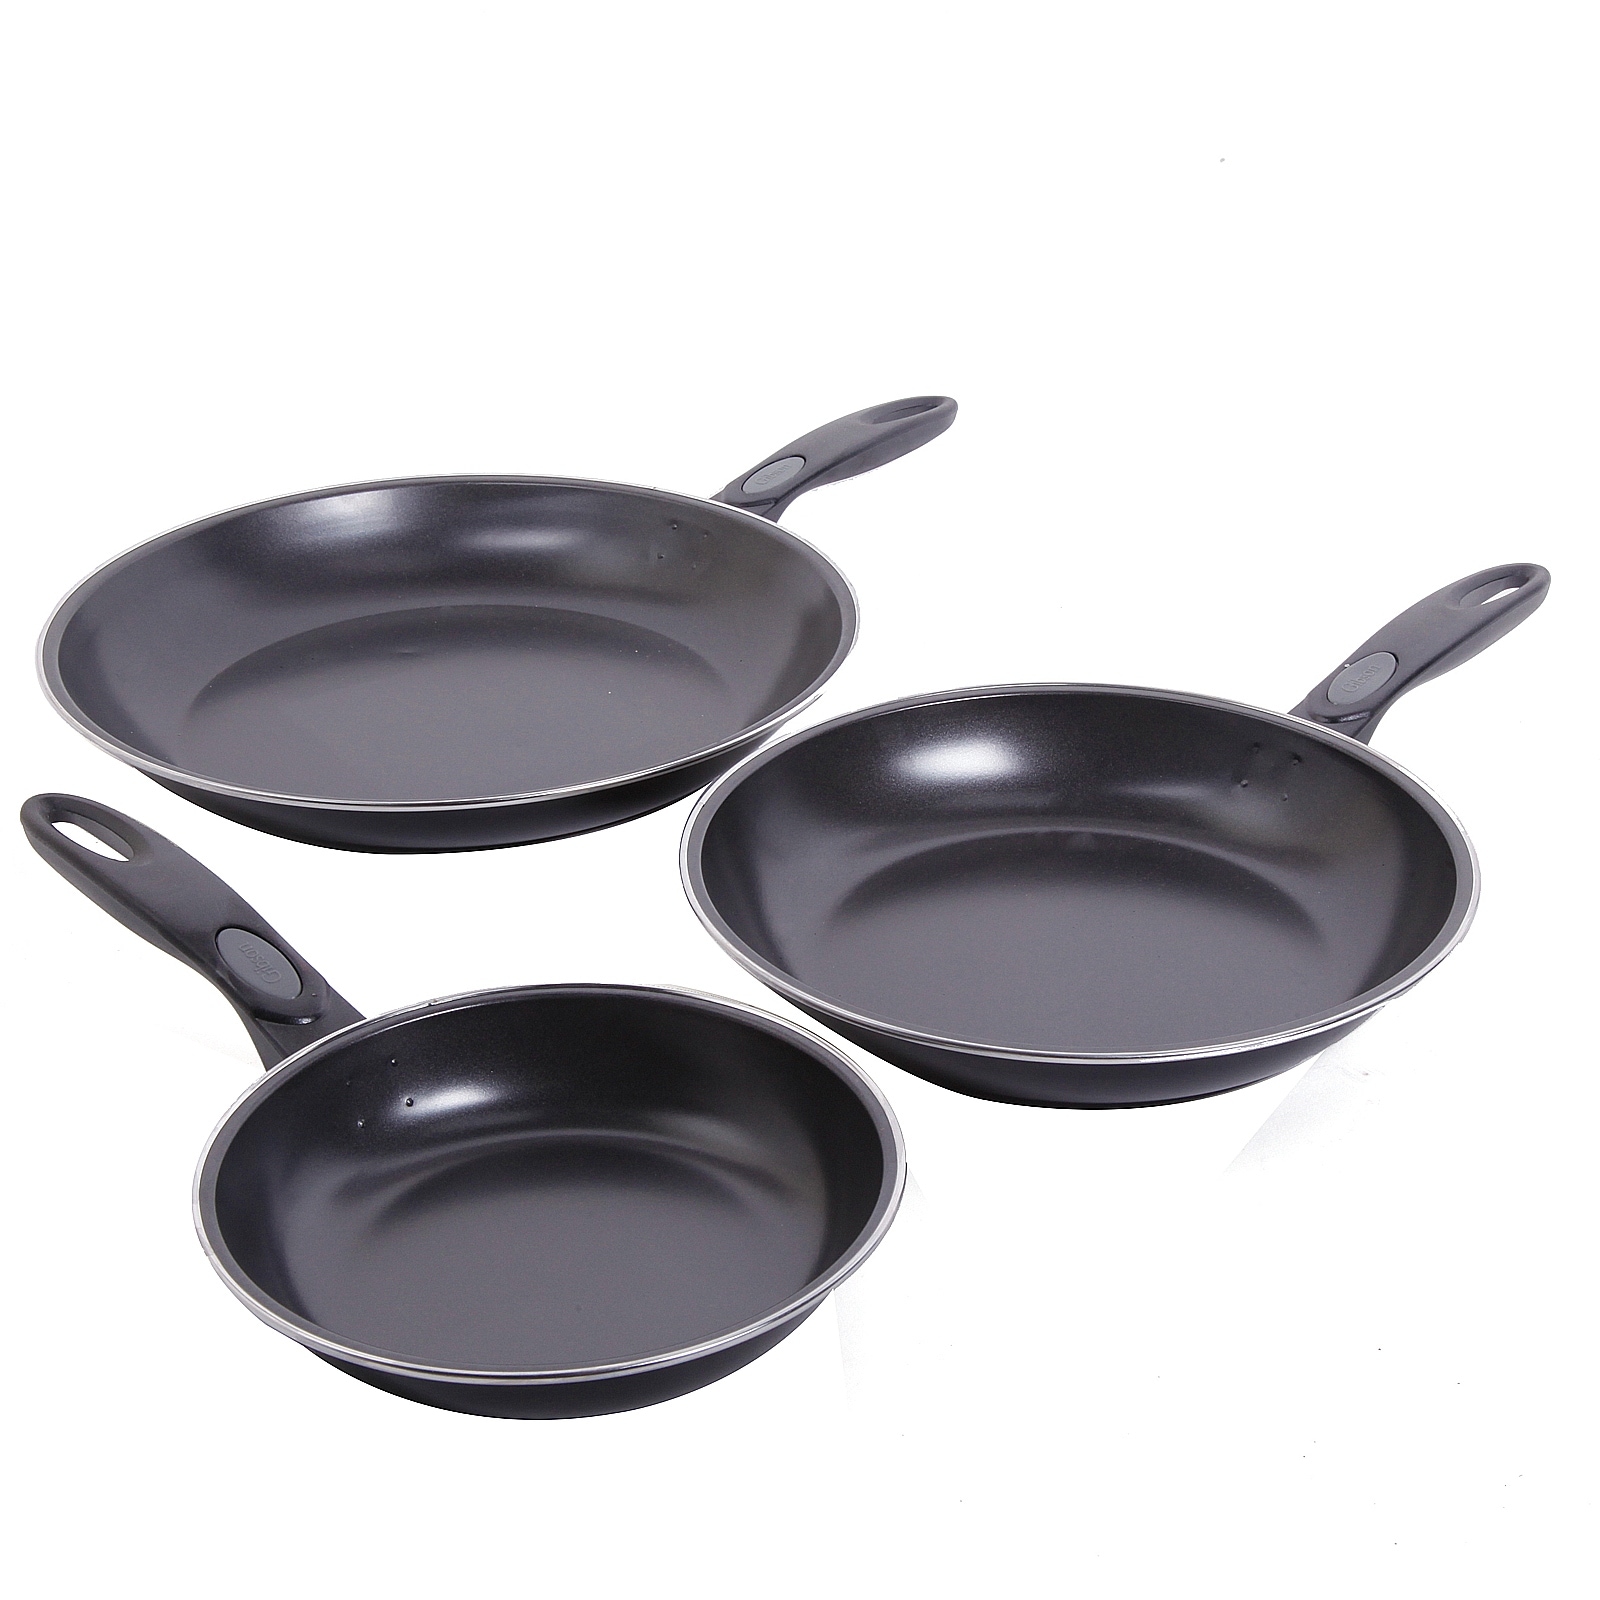 https://ak1.ostkcdn.com/images/products/is/images/direct/cd6822e8778cce1b307705d0c713c2f6d975c719/Aventura-3-Piece-Ez-Cook-Frying-Pan-Set-in-Black.jpg